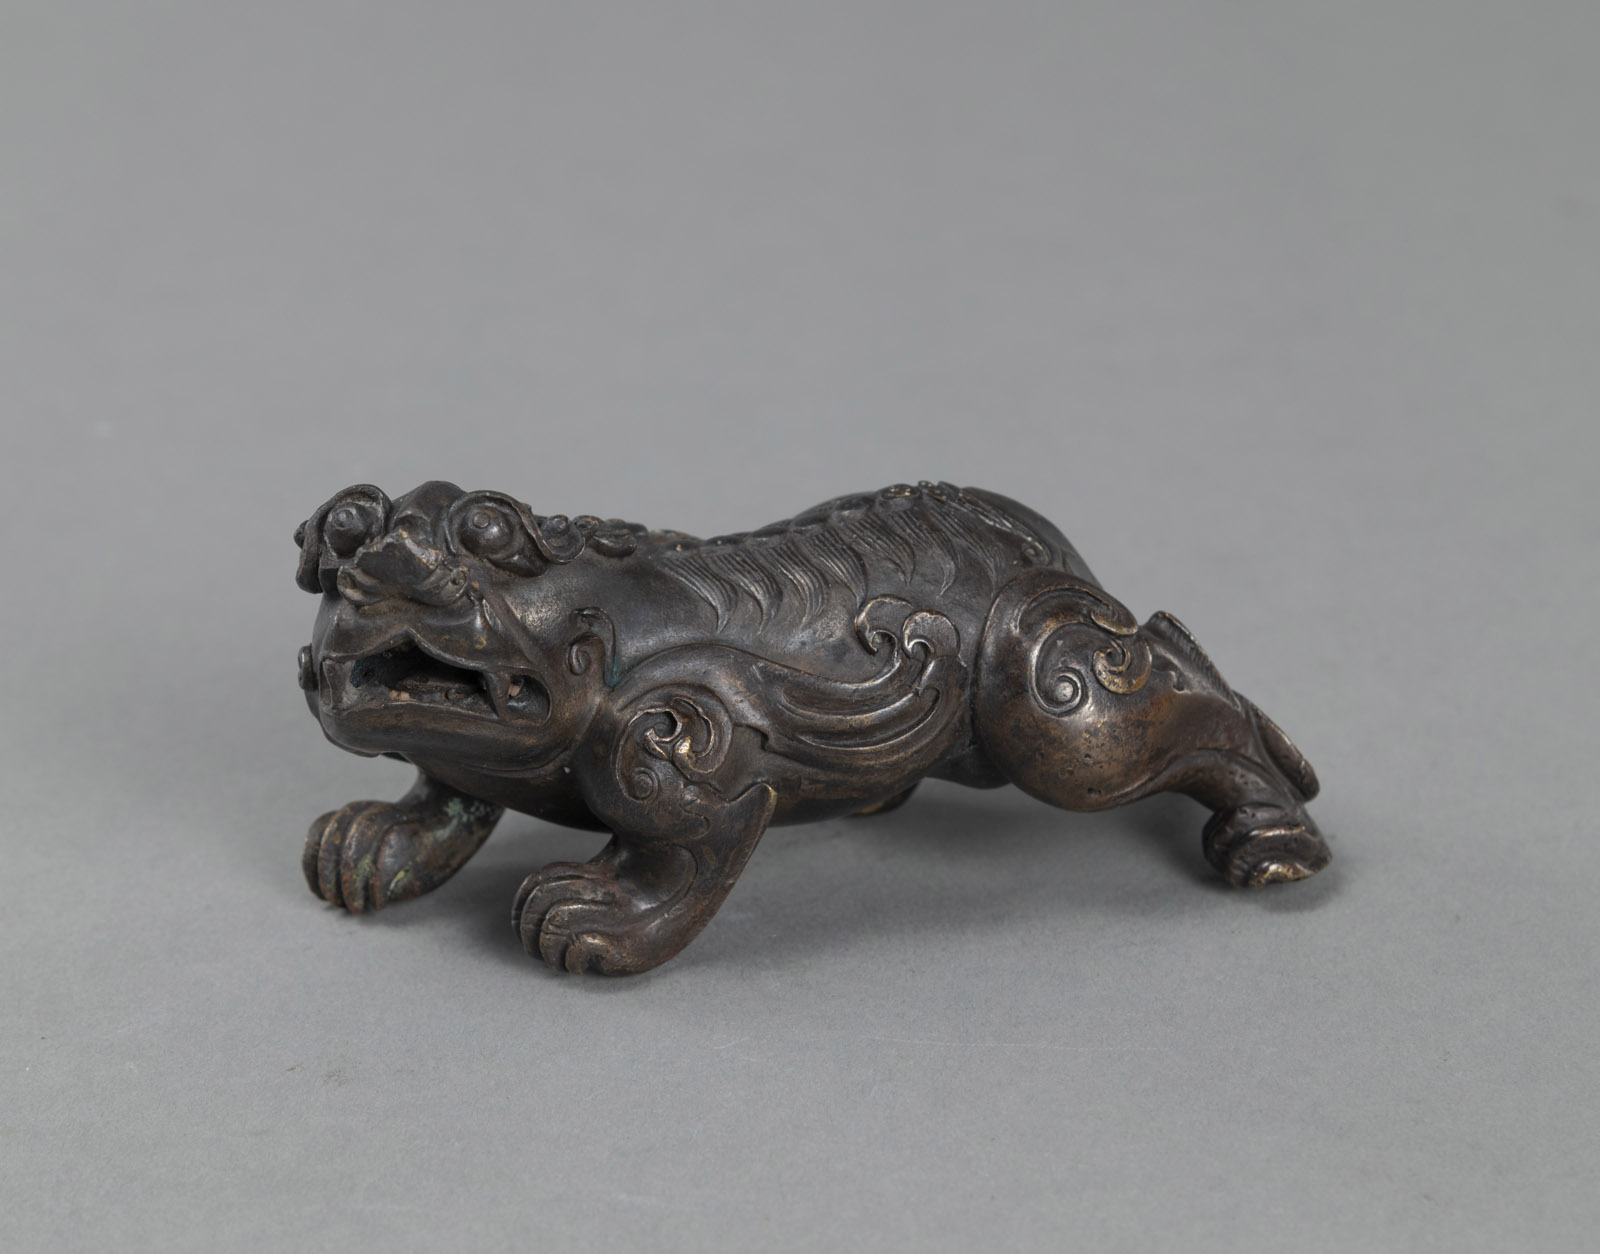 <b>A SMALL BRONZE LION, PROBABLY A PAPER WEIGHT</b>